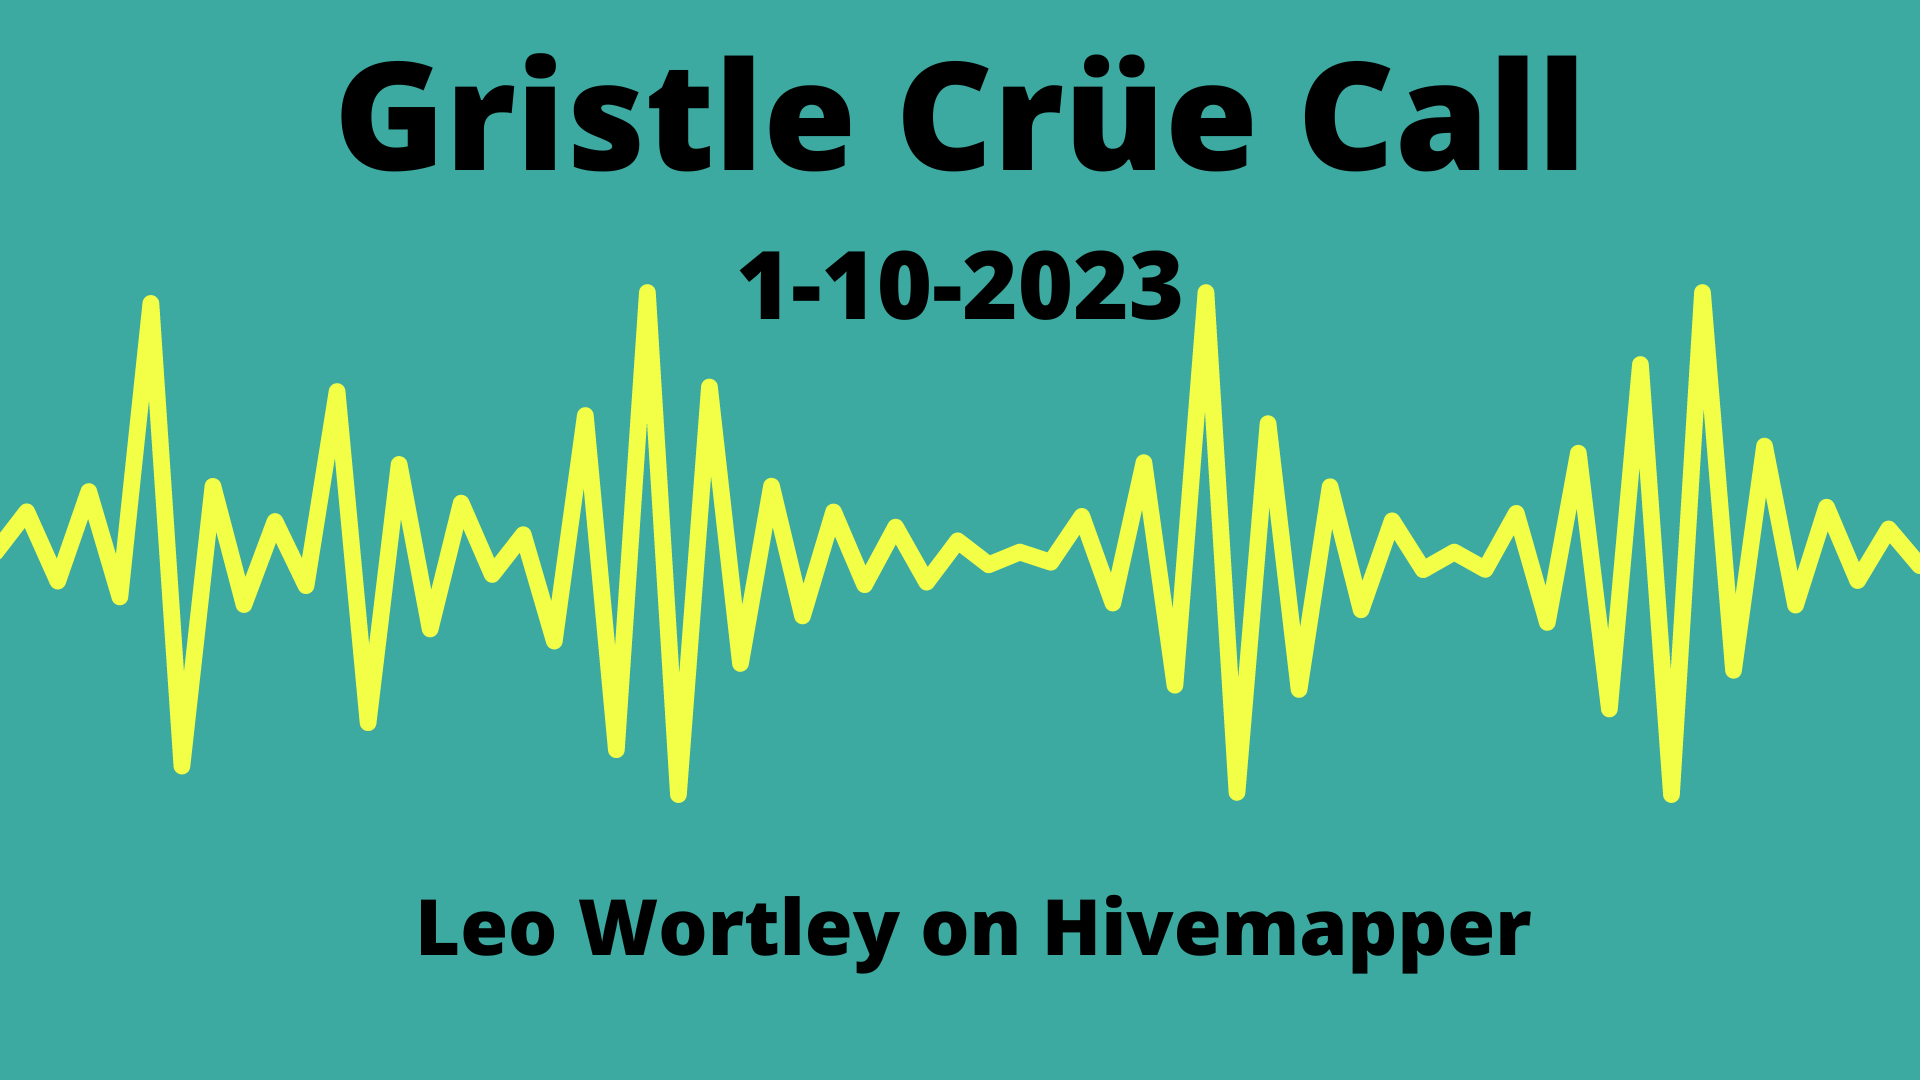 Gristle Crüe Call — Leo Wortley from Future Networks